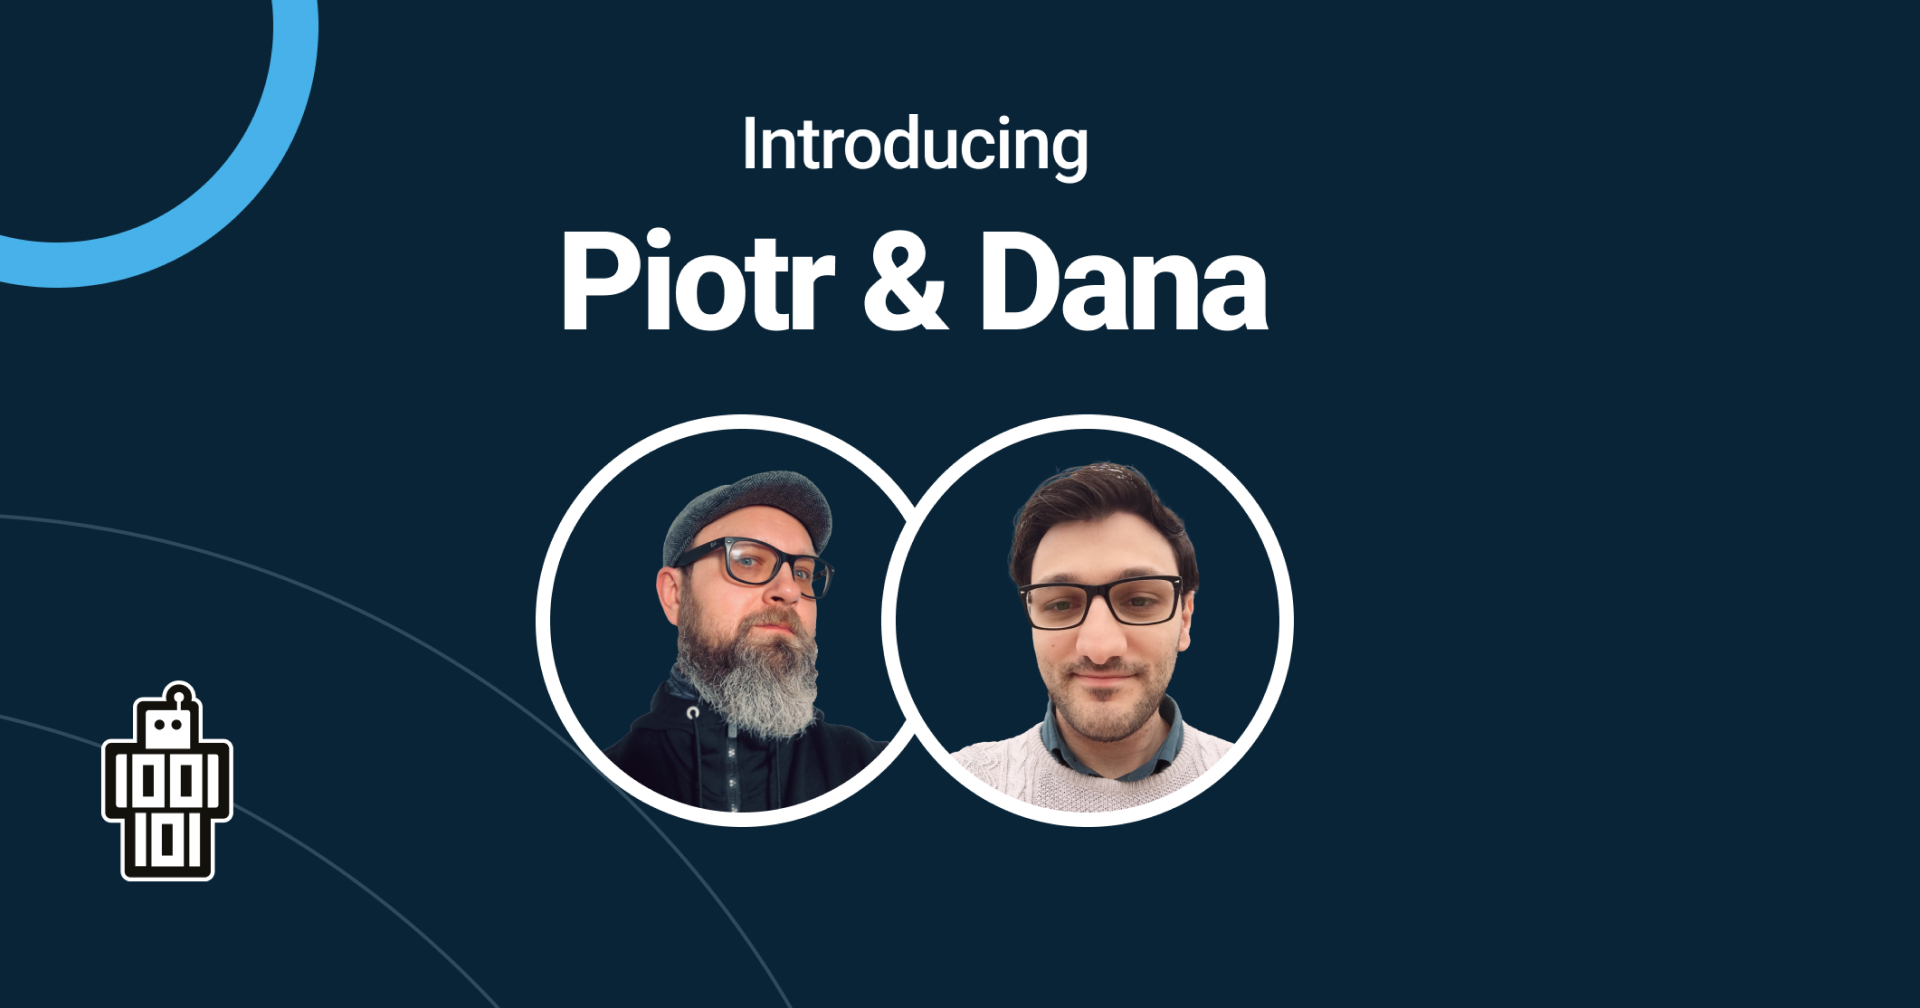 Meet Piotr and Dana - We would like to introduce you to our team members Piotr and Dana